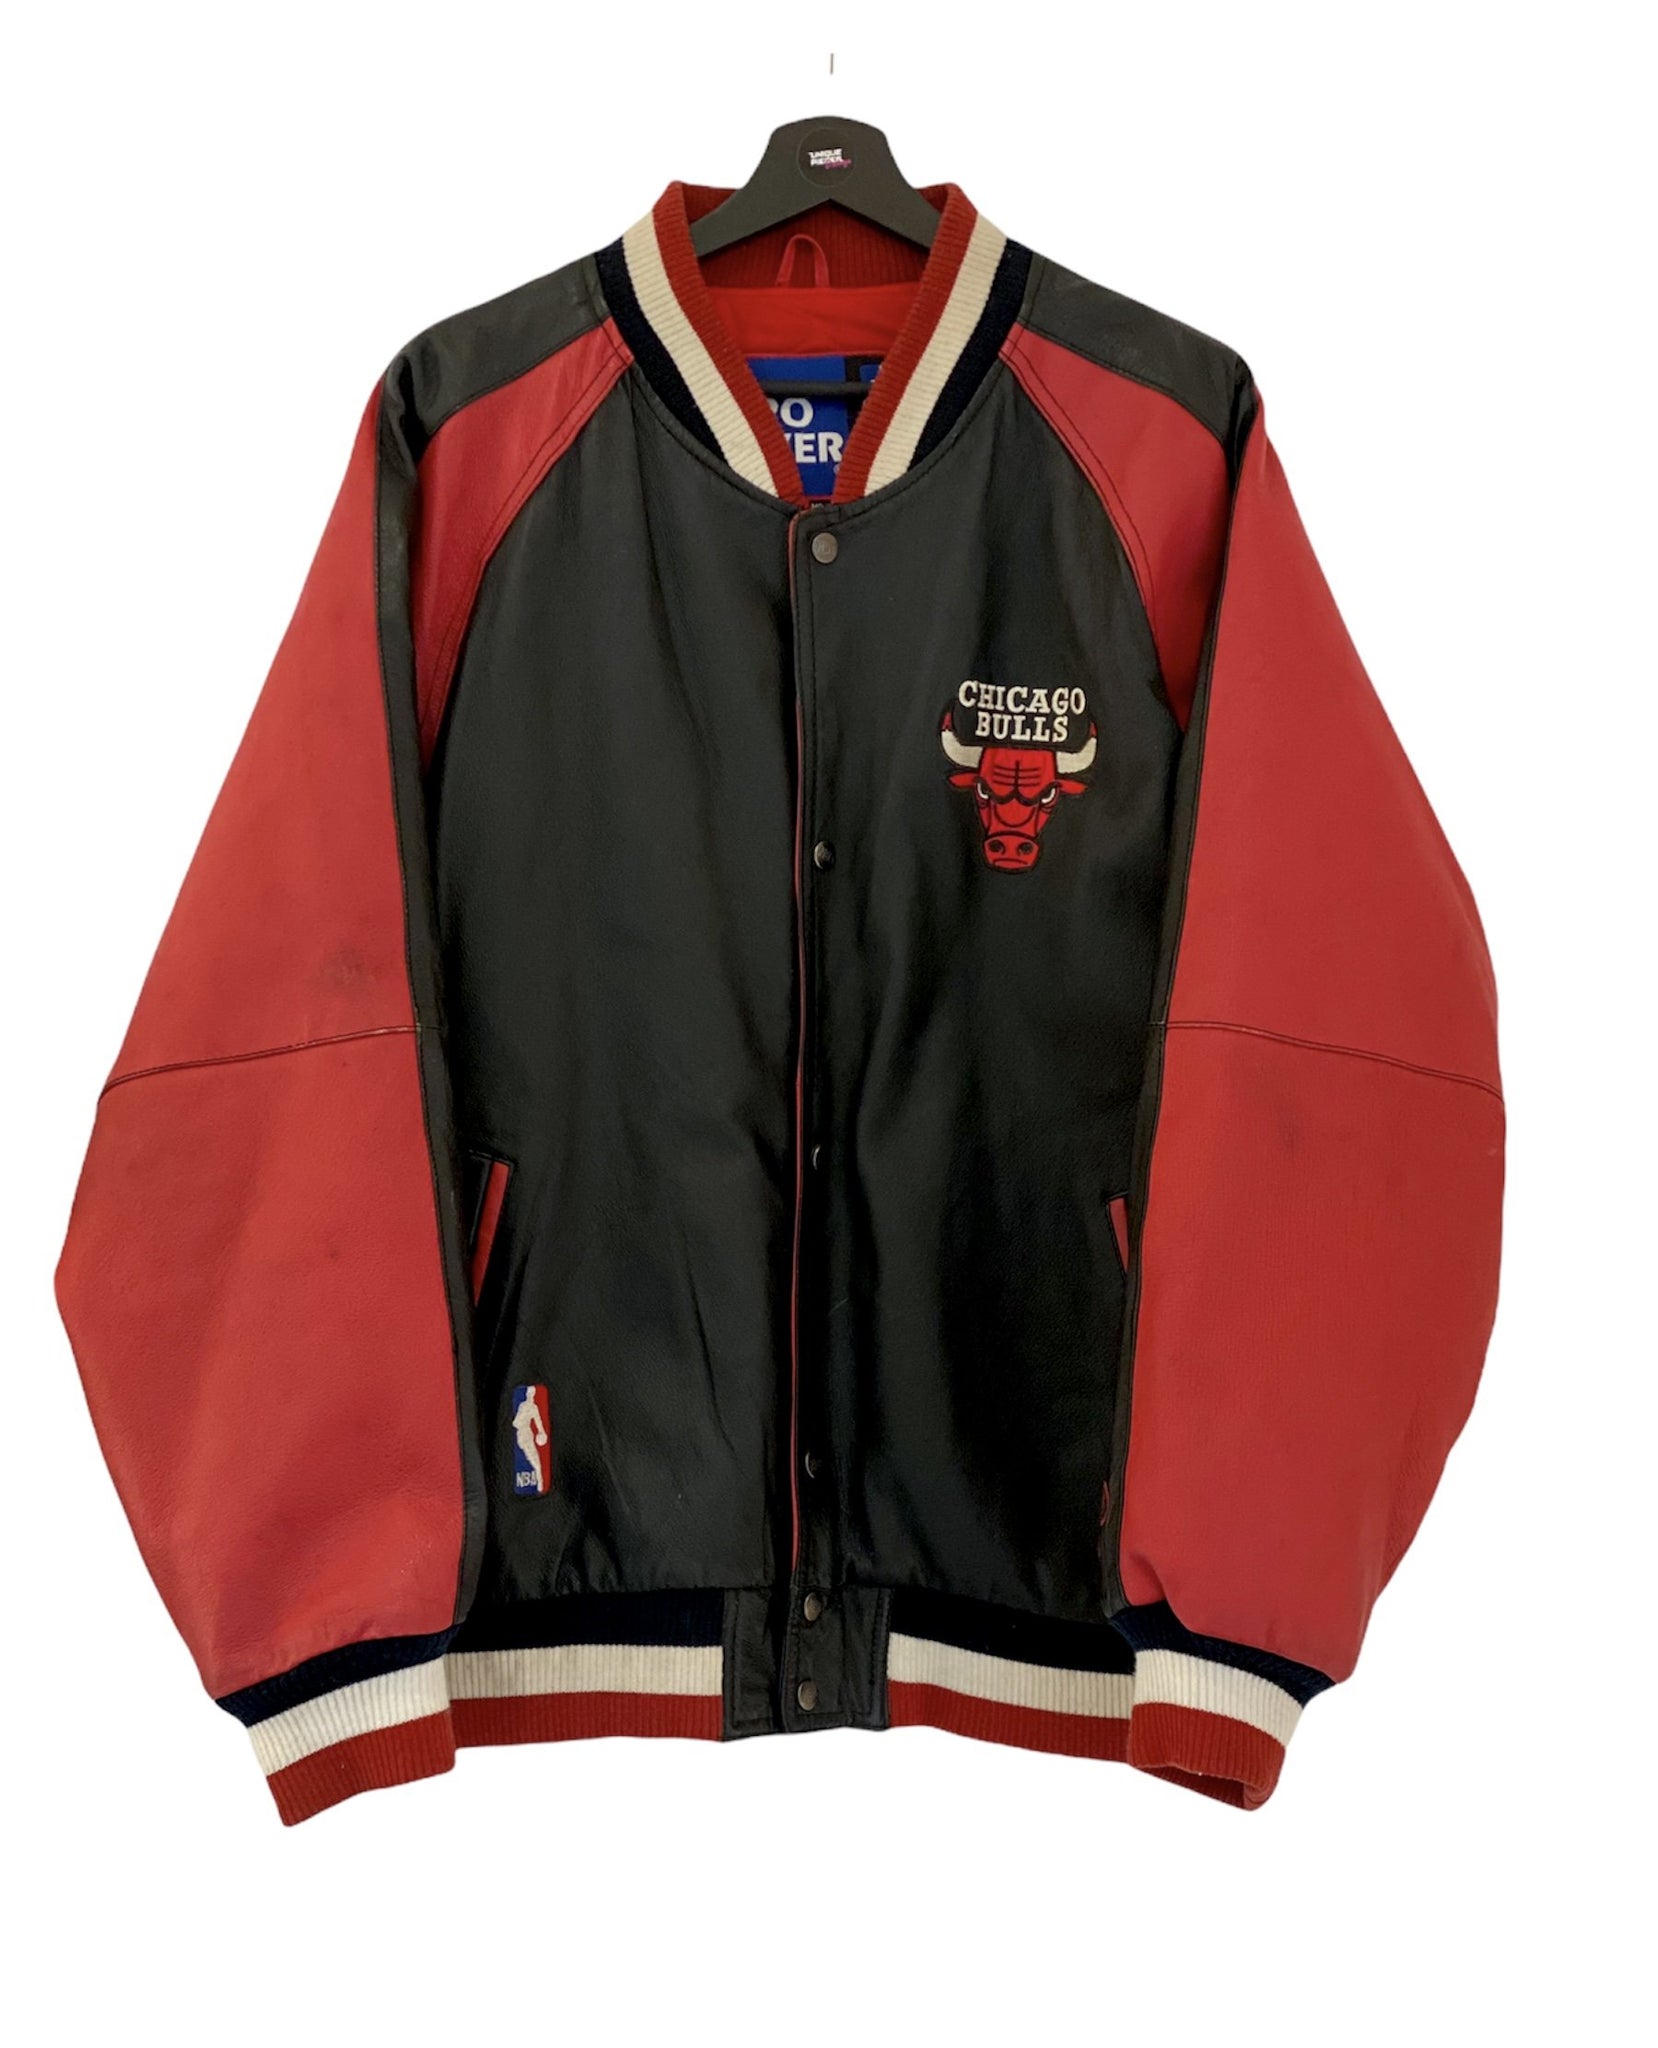 Pro Player Chicago Bulls NBA Bomber leather jacket Red/ Black- white  Medium freeshipping - Unique Pieces Vintage